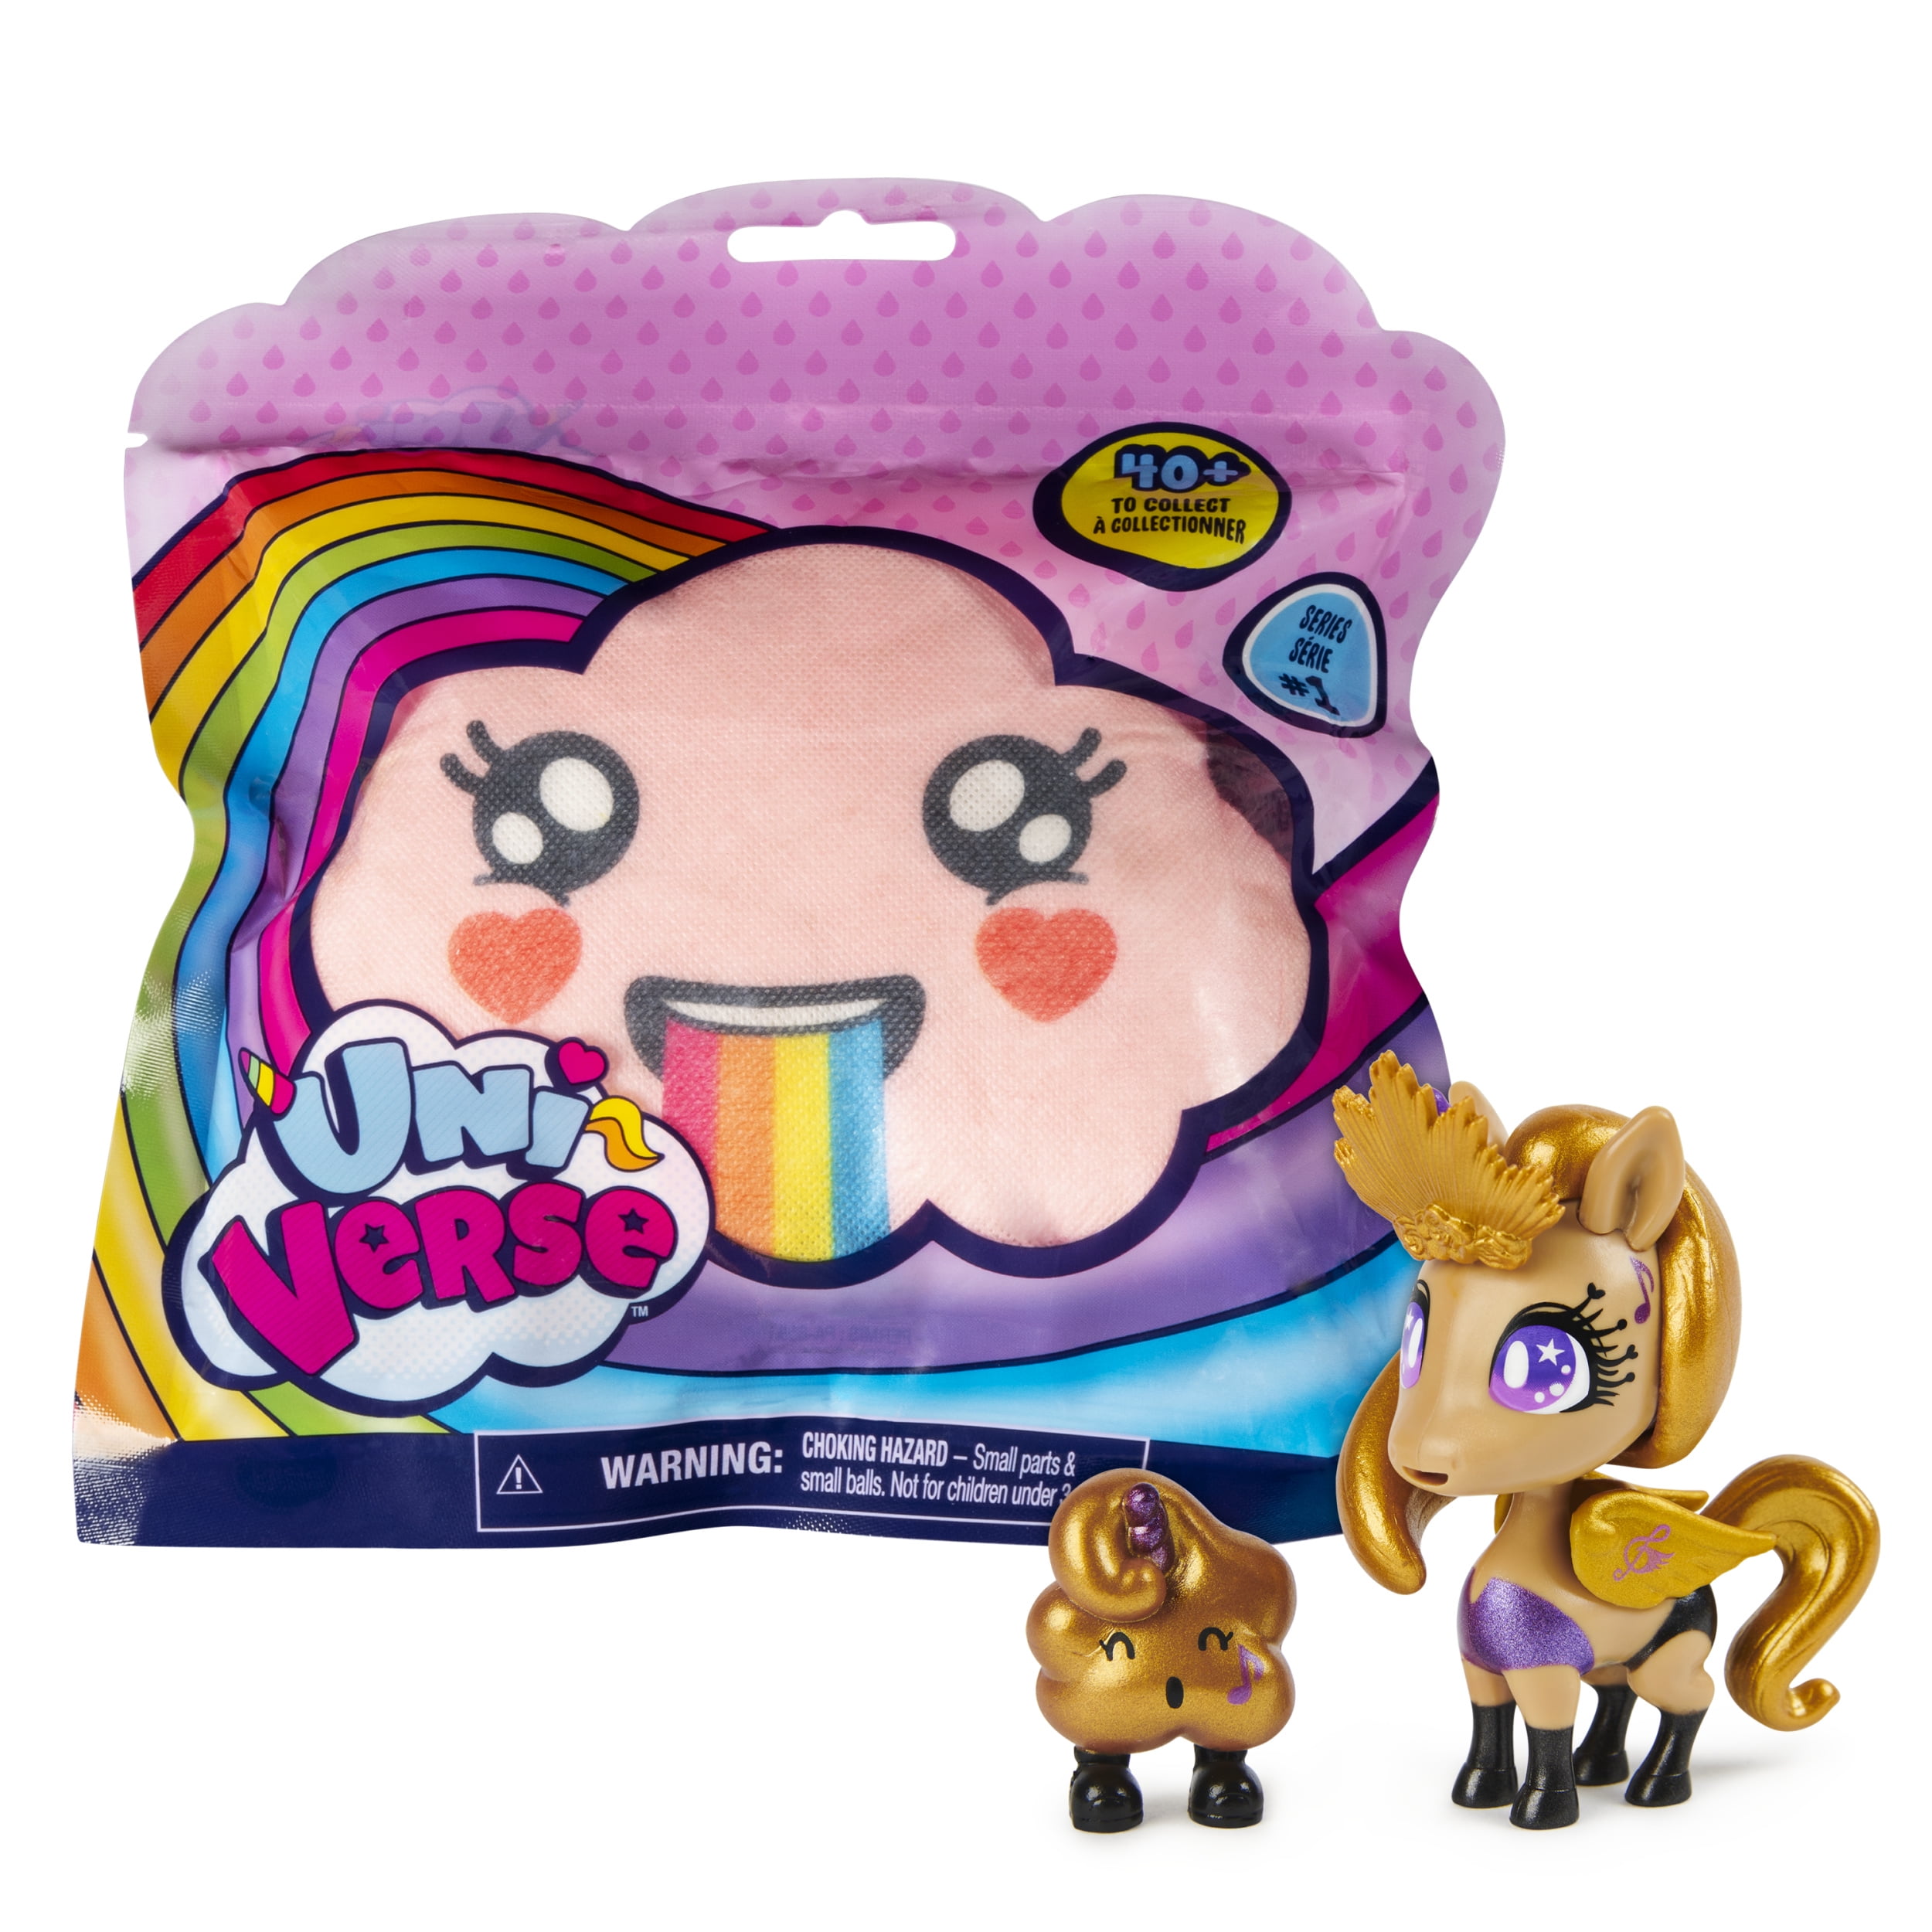 Uni-verse 2 Pack Collectible Surprise Unicorns with Mystery Accessories Styles May Vary 